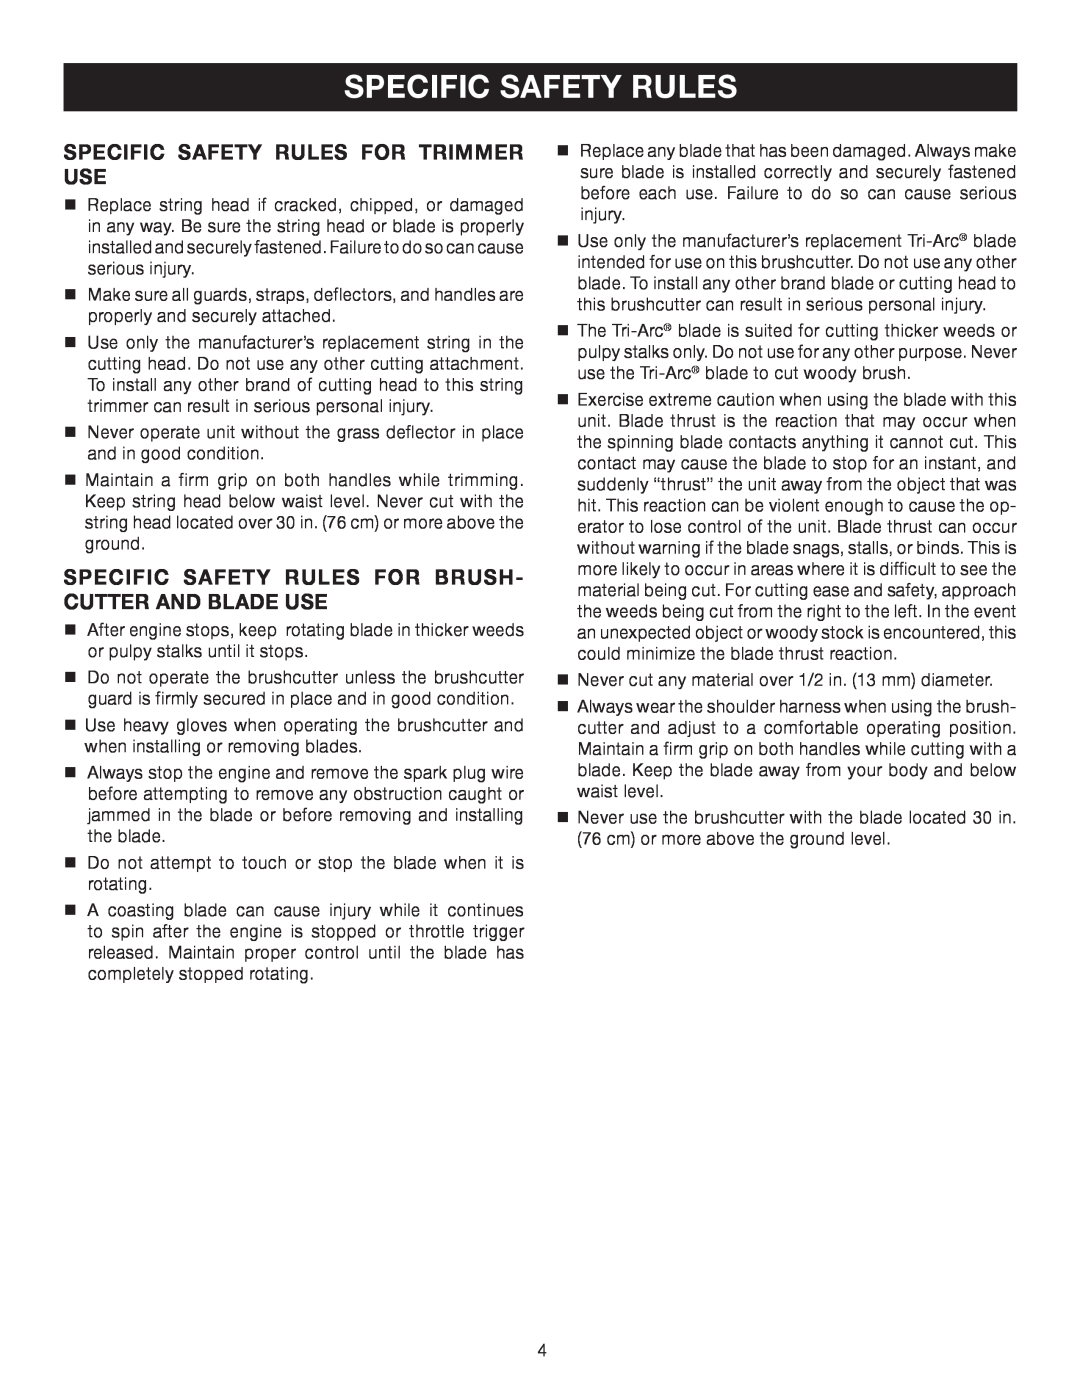 Ryobi SS30 RY30240 manual Specific Safety Rules For Trimmer Use, Specific Safety Rules For Brush- Cutter And Blade Use 